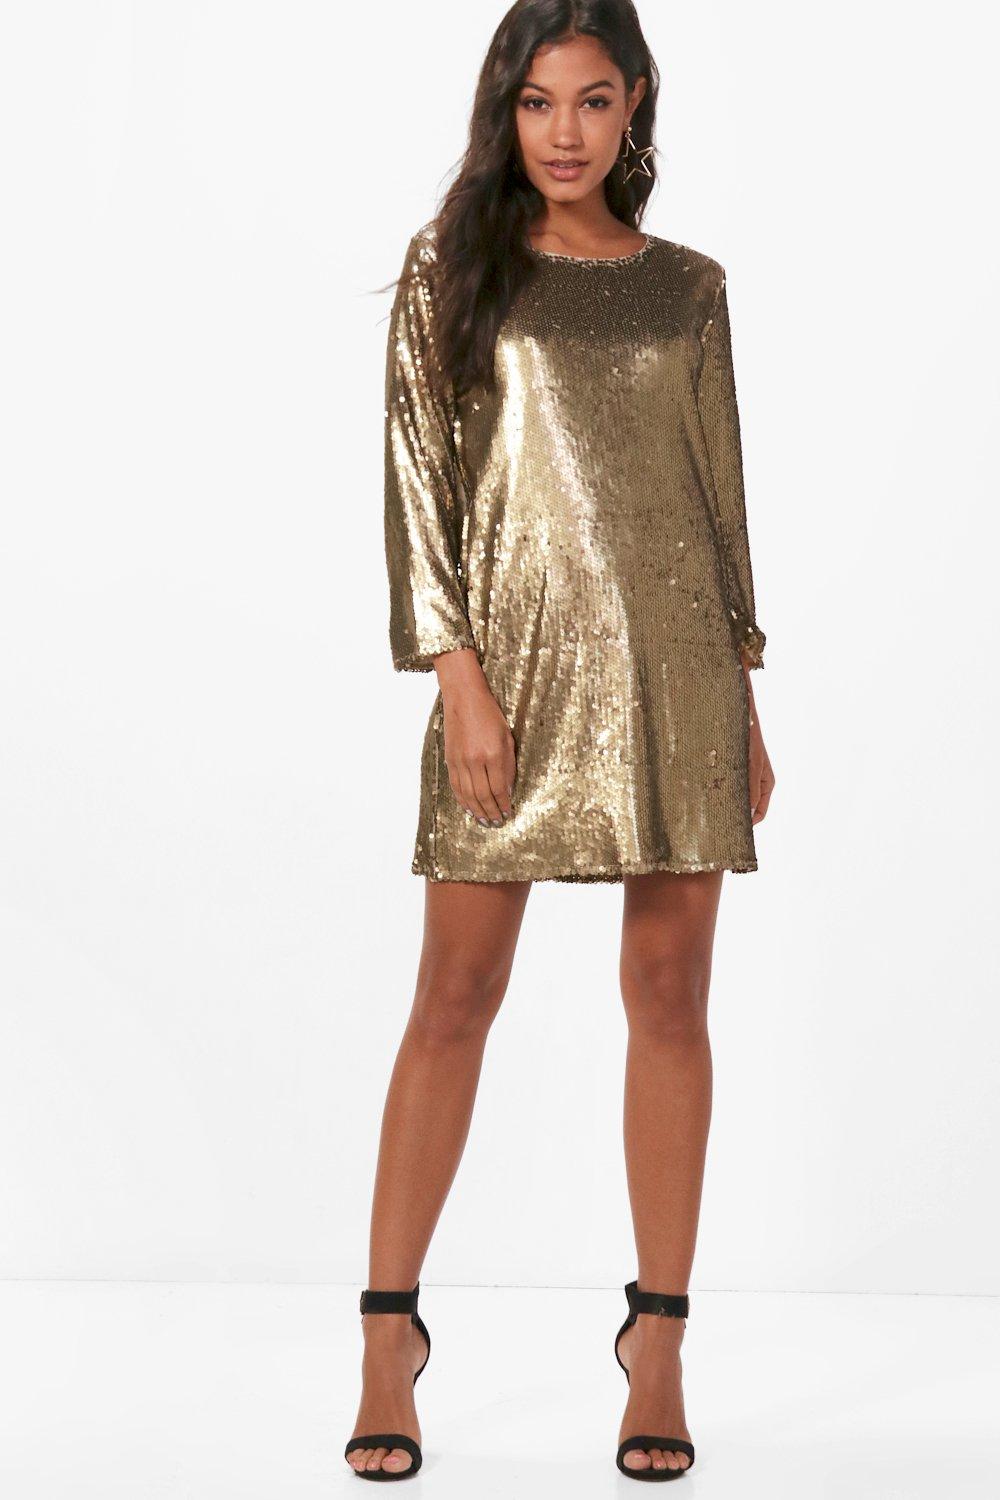 These new years eve sequin dresses are so cute, and cheap!